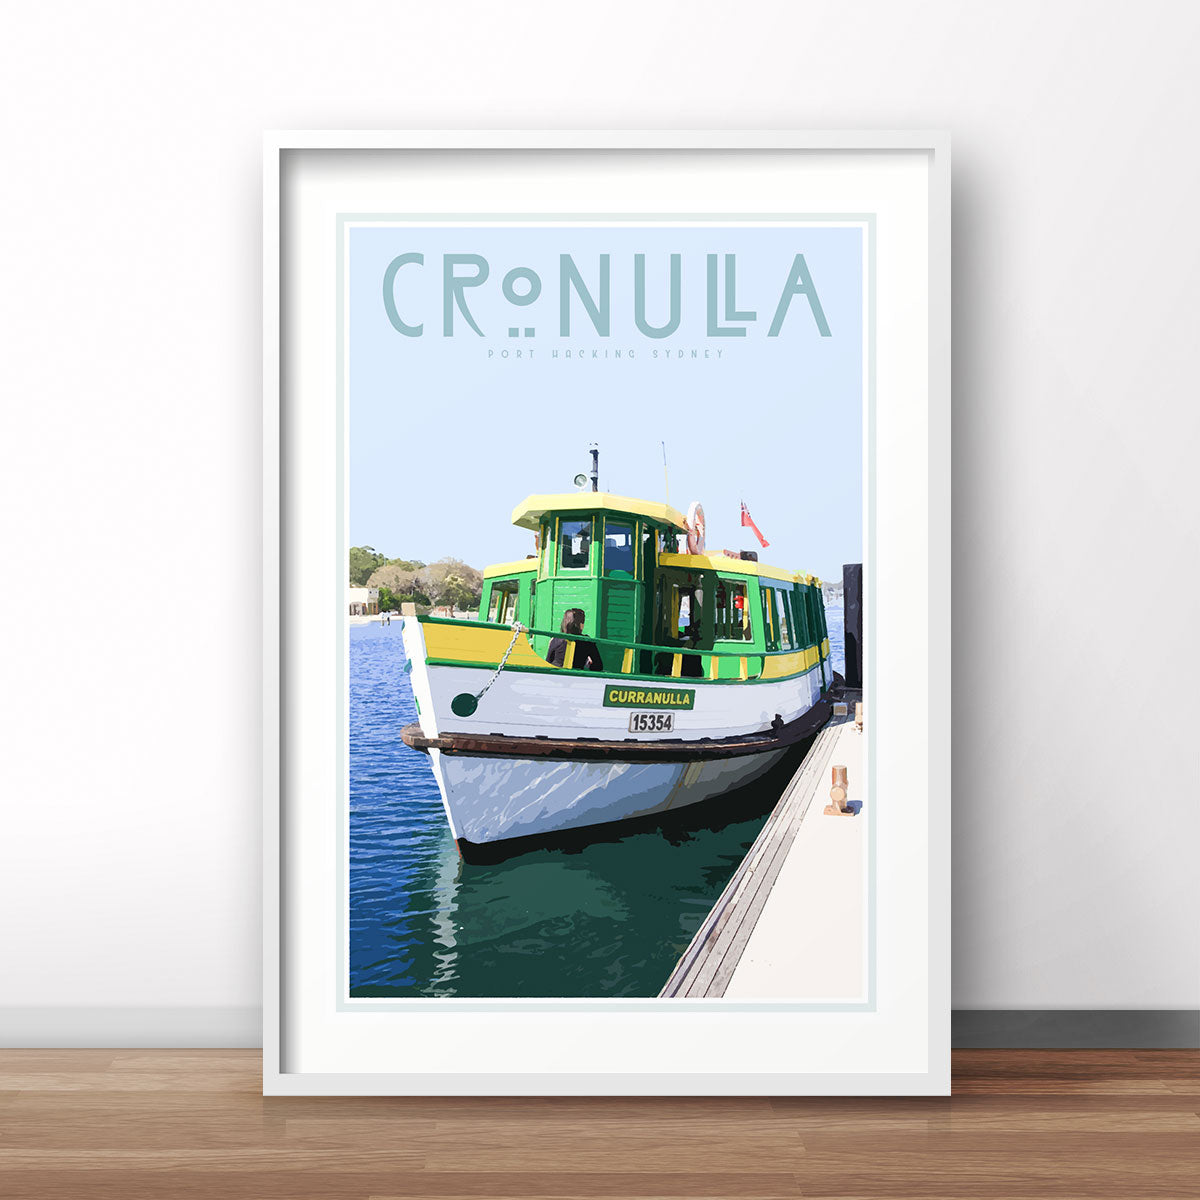 Cronulla ferry vintage style travel print, stylists favourite, designed by places we luv